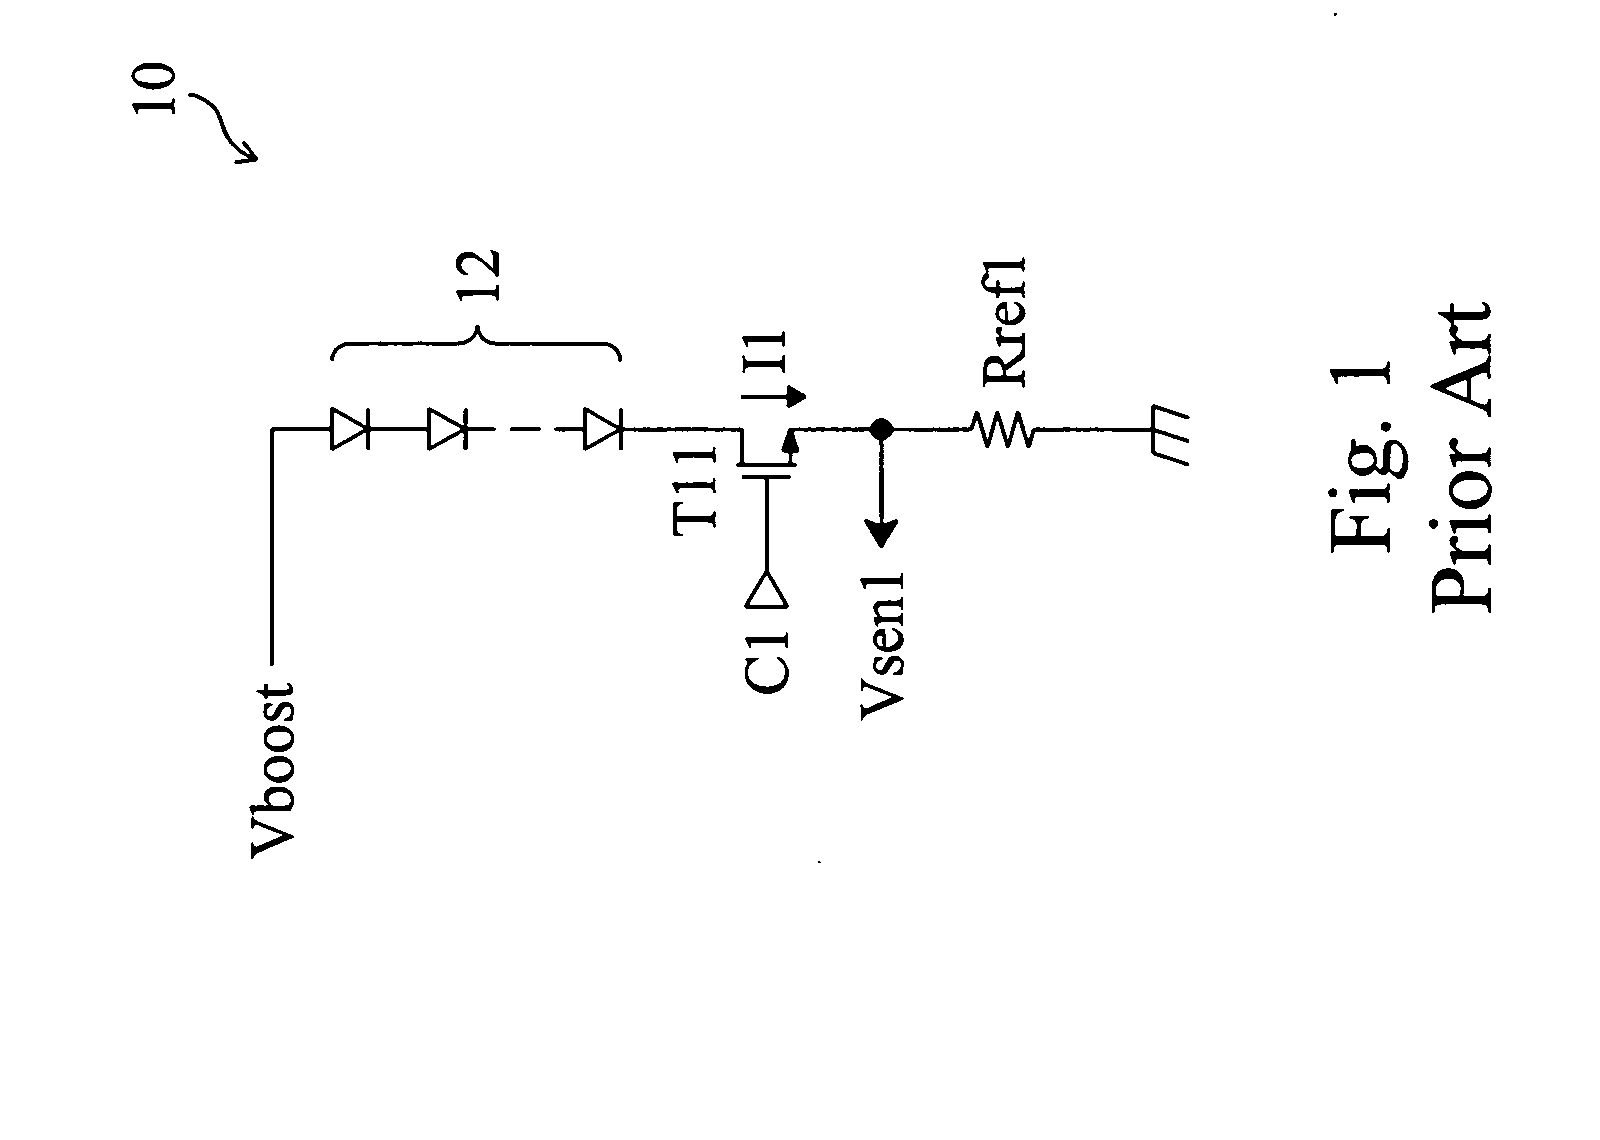 LED driving circuit and method